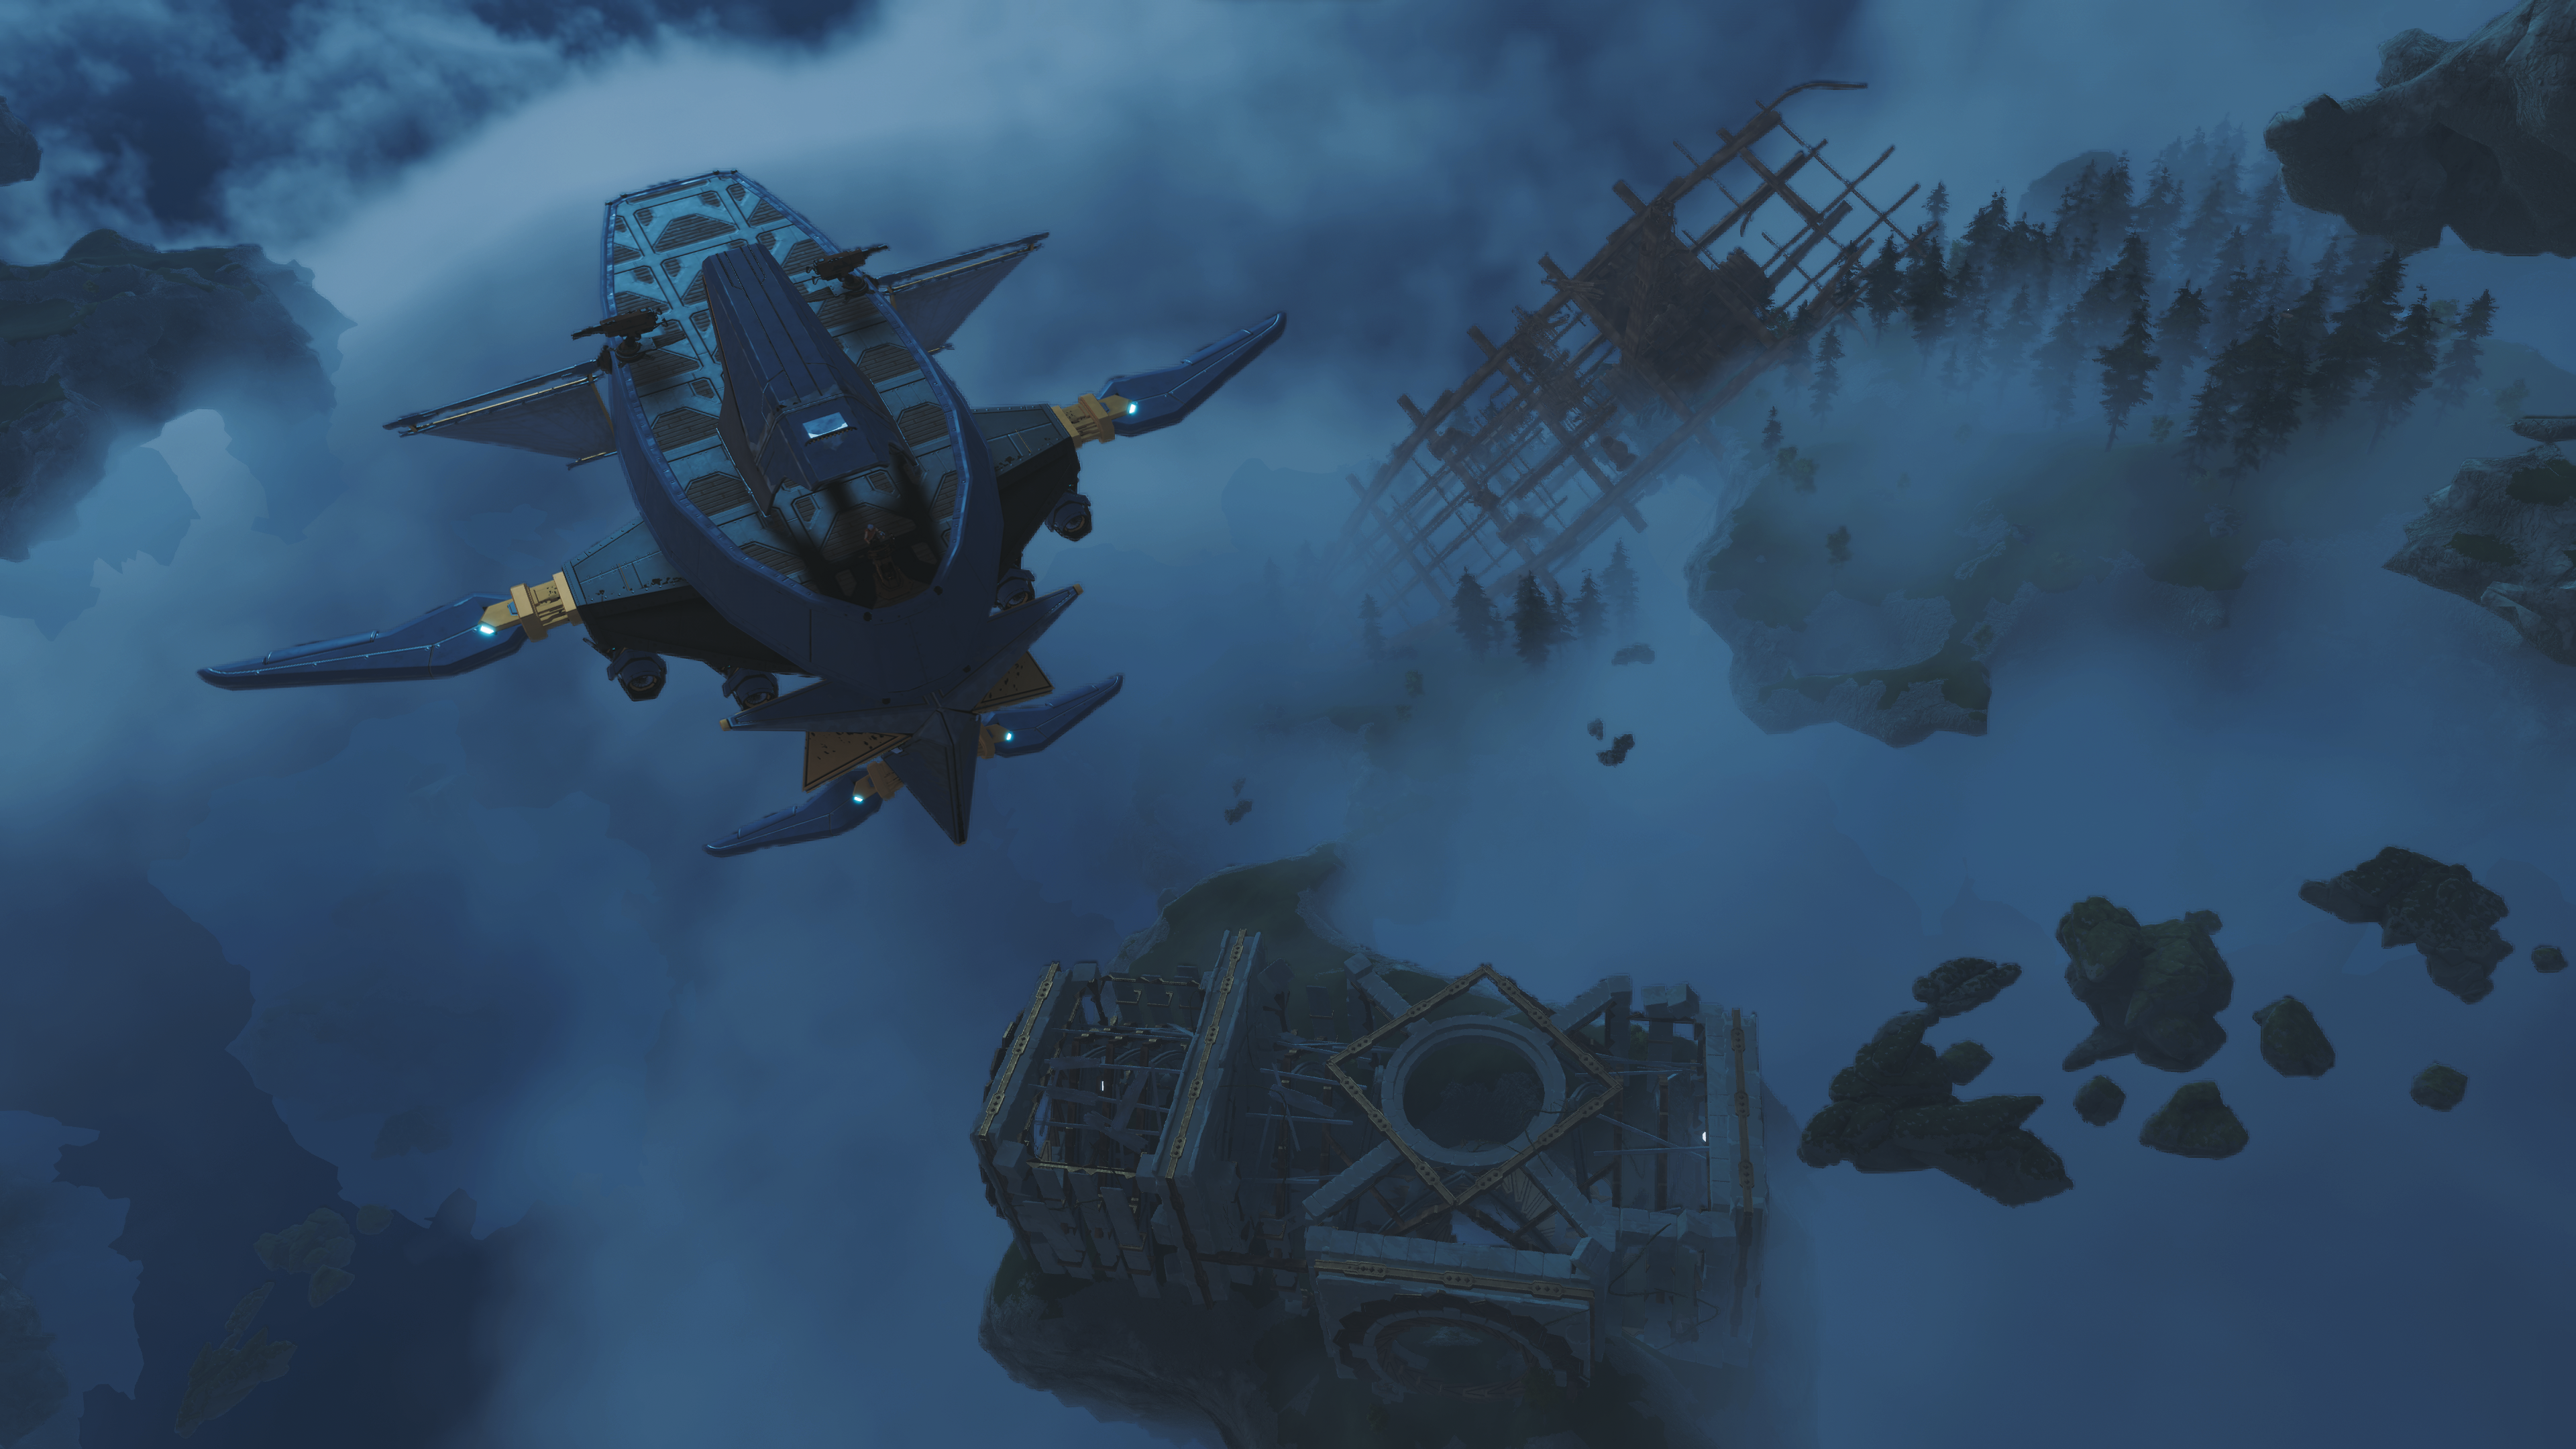 “Our most recent playtest has introduced new shipbuilding tools, but our goal is to give players an unprecedented level of freedom to sculpt and customise their floating homes. The heroes of Lost Skies are nomads, and instead of building a camp and defending it, players acquire resources and knowledge to build stronger, faster, deadlier ships able to venture out into fiercer storms and battle giant threats beyond the horizon.”